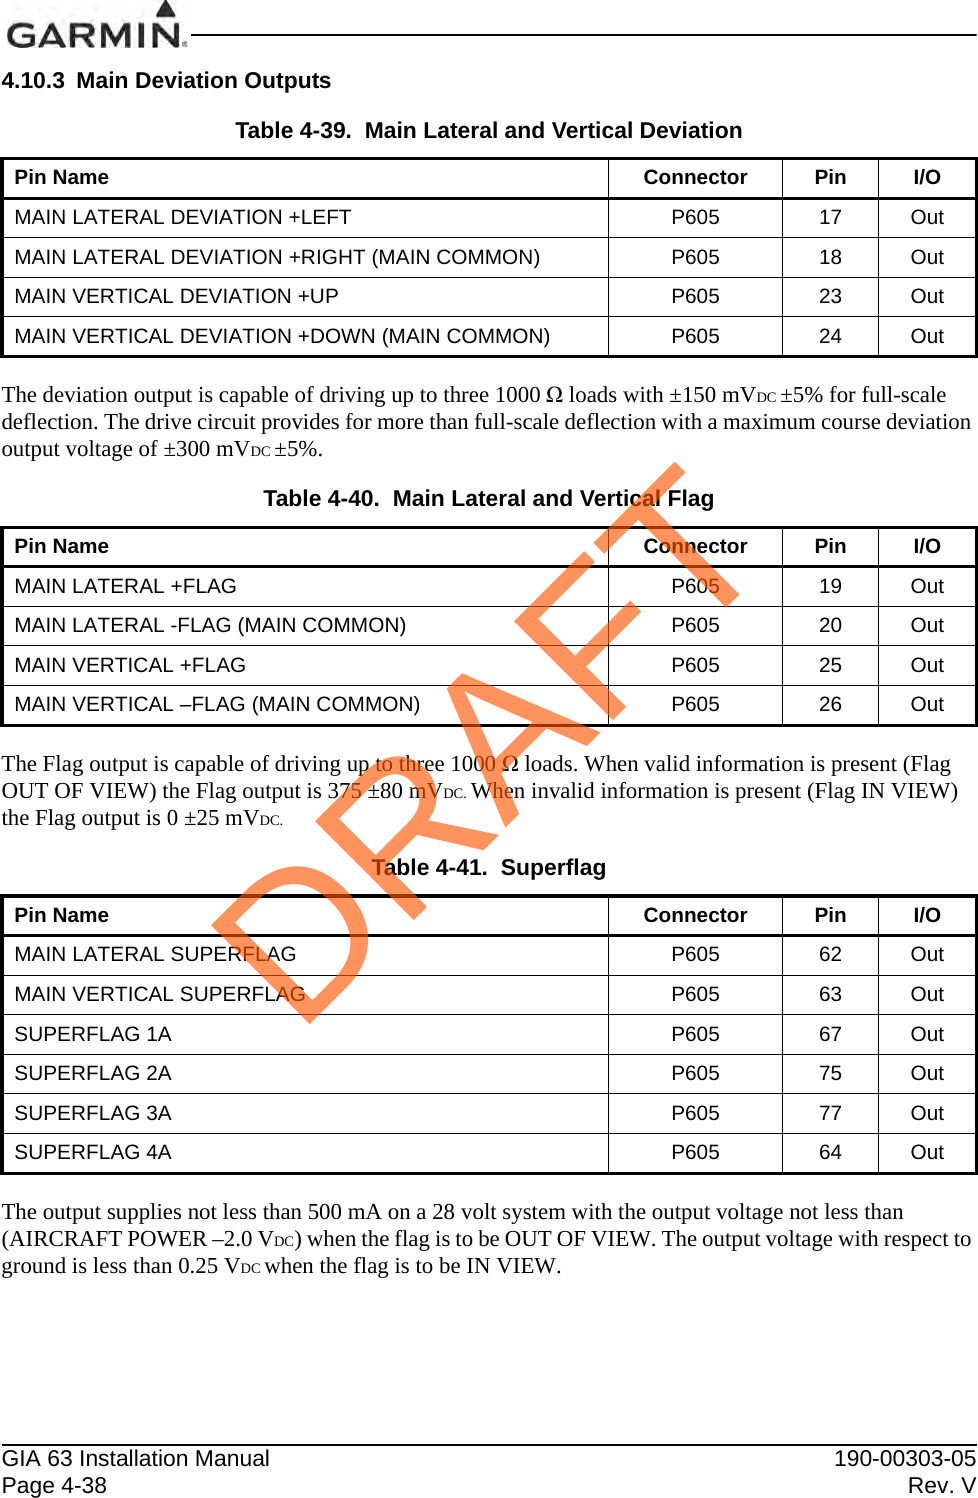 GIA 63 Installation Manual 190-00303-05Page 4-38 Rev. V4.10.3 Main Deviation OutputsThe deviation output is capable of driving up to three 1000 Ω loads with ±150 mVDC ±5% for full-scale deflection. The drive circuit provides for more than full-scale deflection with a maximum course deviation output voltage of ±300 mVDC ±5%.The Flag output is capable of driving up to three 1000 Ω loads. When valid information is present (Flag OUT OF VIEW) the Flag output is 375 ±80 mVDC. When invalid information is present (Flag IN VIEW) the Flag output is 0 ±25 mVDC.The output supplies not less than 500 mA on a 28 volt system with the output voltage not less than (AIRCRAFT POWER –2.0 VDC) when the flag is to be OUT OF VIEW. The output voltage with respect to ground is less than 0.25 VDC when the flag is to be IN VIEW.Table 4-39.  Main Lateral and Vertical DeviationPin Name Connector Pin I/OMAIN LATERAL DEVIATION +LEFT P605 17 OutMAIN LATERAL DEVIATION +RIGHT (MAIN COMMON) P605 18 OutMAIN VERTICAL DEVIATION +UP P605 23 OutMAIN VERTICAL DEVIATION +DOWN (MAIN COMMON) P605 24 OutTable 4-40.  Main Lateral and Vertical FlagPin Name Connector Pin I/OMAIN LATERAL +FLAG P605 19 OutMAIN LATERAL -FLAG (MAIN COMMON) P605 20 OutMAIN VERTICAL +FLAG P605 25 OutMAIN VERTICAL –FLAG (MAIN COMMON) P605 26 OutTable 4-41.  SuperflagPin Name Connector Pin I/OMAIN LATERAL SUPERFLAG P605 62 OutMAIN VERTICAL SUPERFLAG P605 63 OutSUPERFLAG 1A P605 67 OutSUPERFLAG 2A P605 75 OutSUPERFLAG 3A P605 77 OutSUPERFLAG 4A P605 64 OutDRAFT